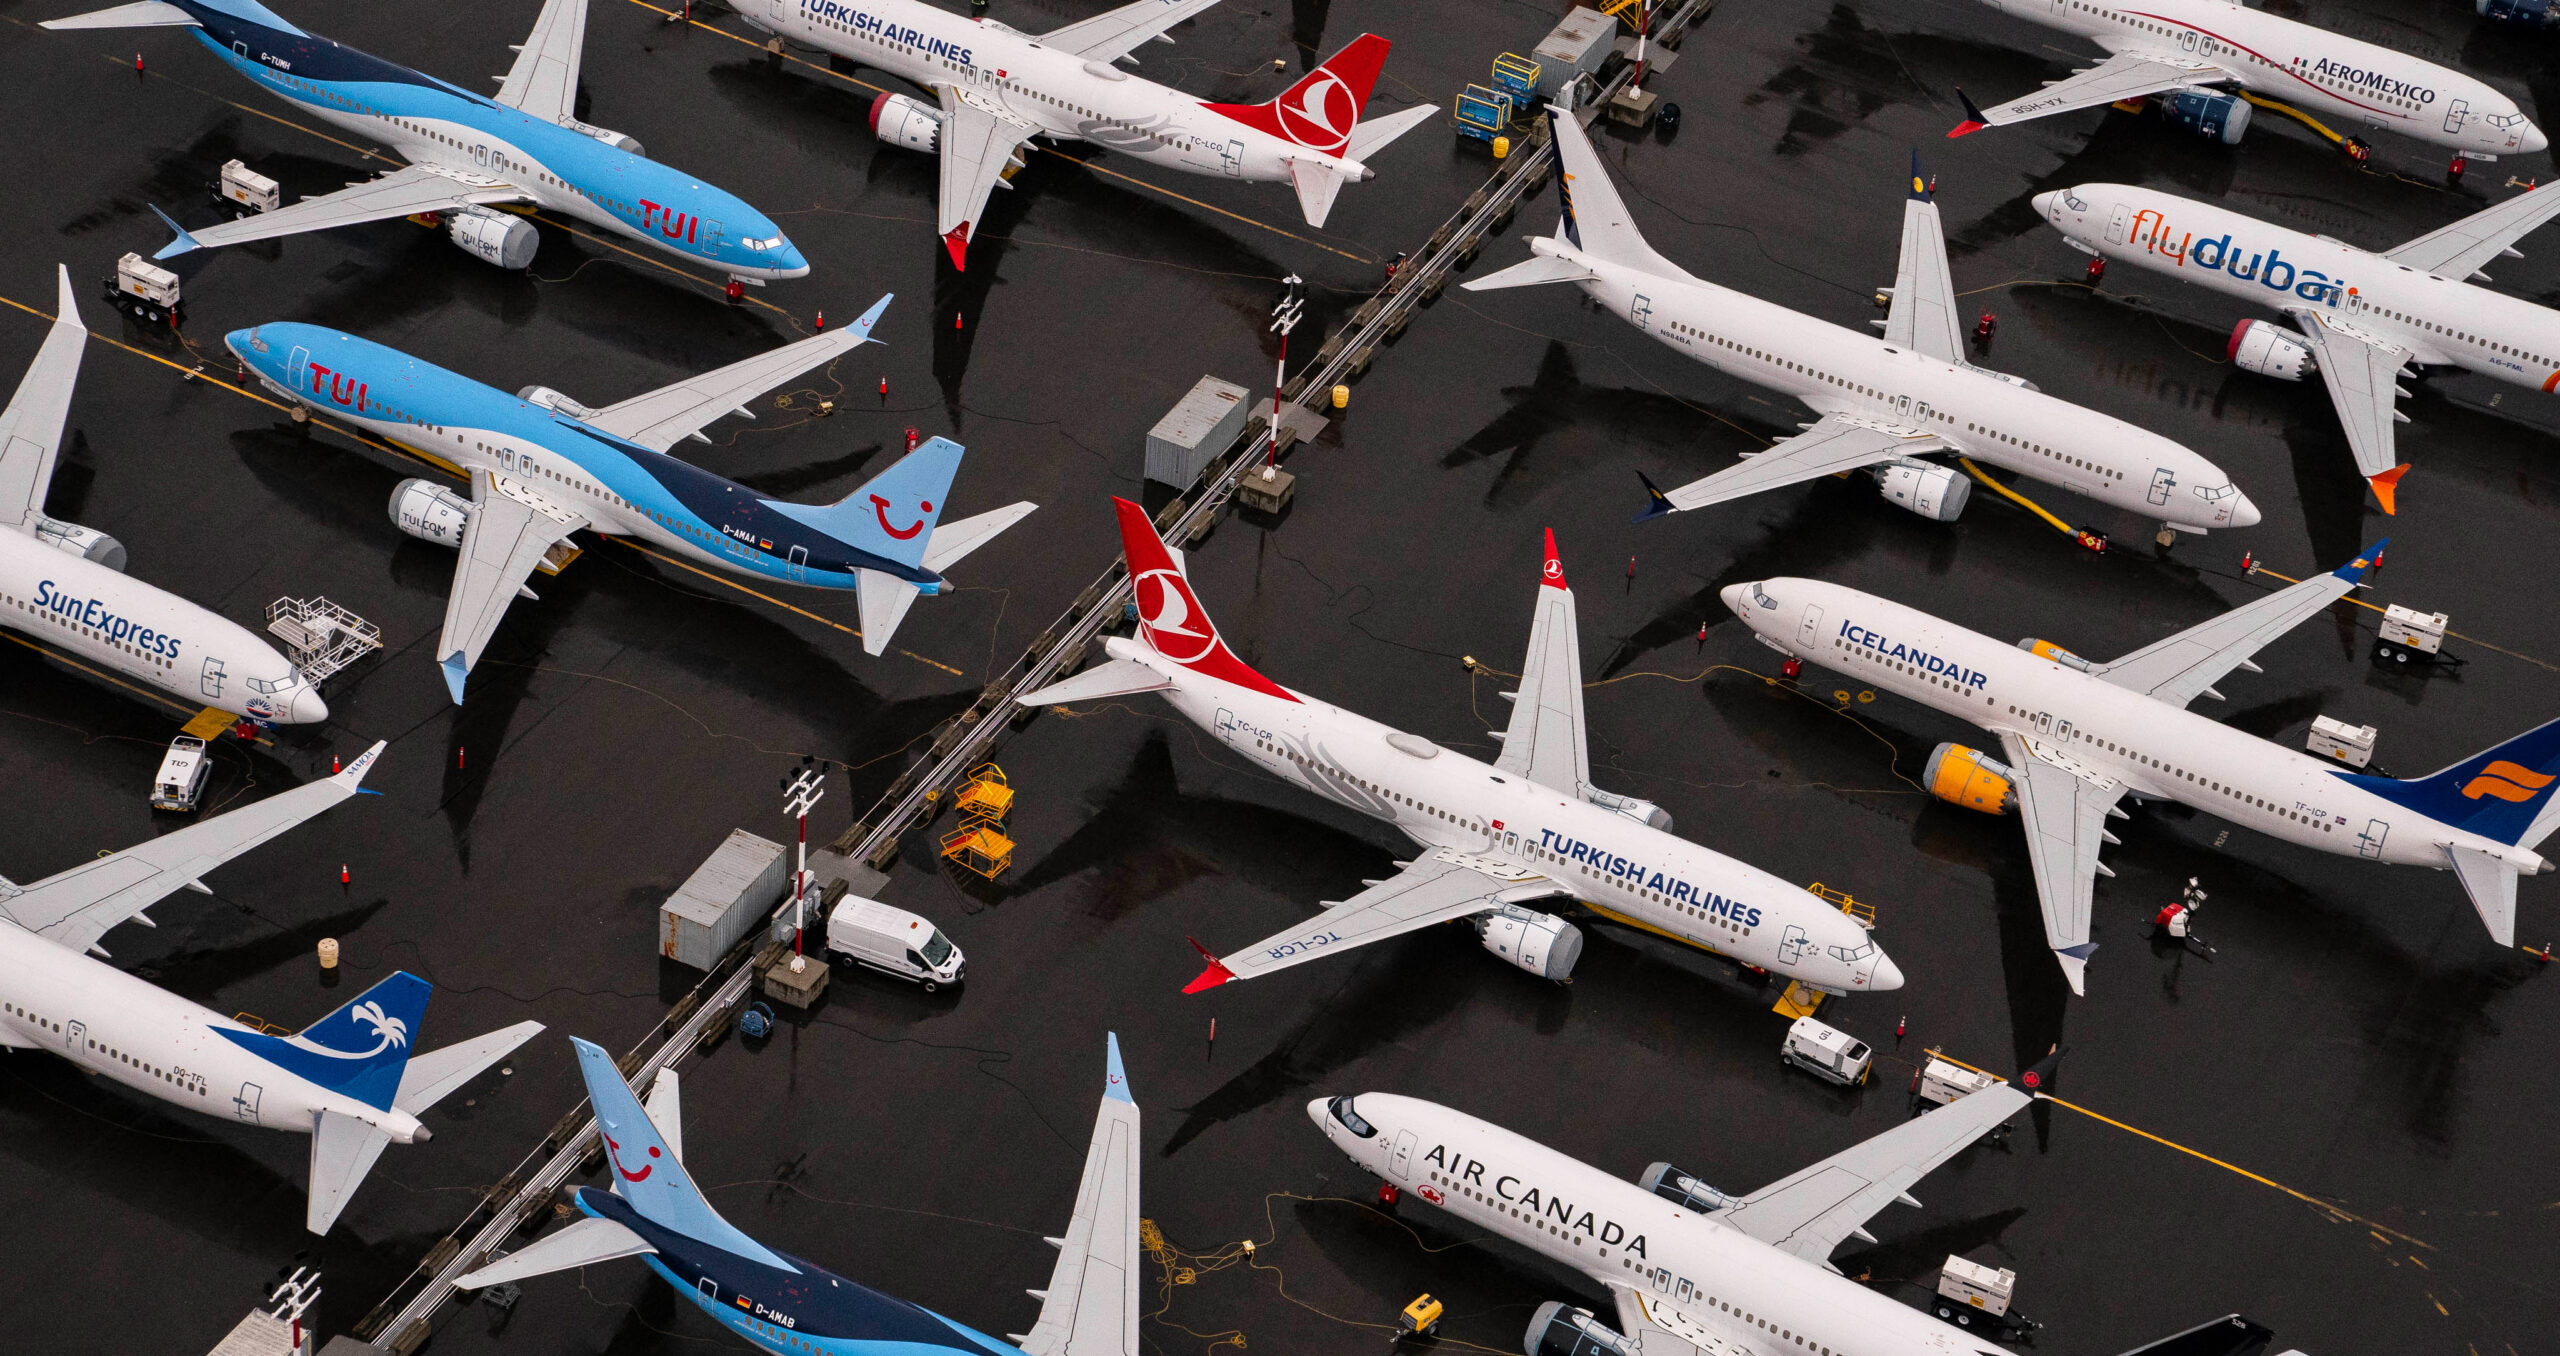 ‘Flight shame’ had been predicted to halve passenger growth (Photo: David Ryder/Getty Images) 